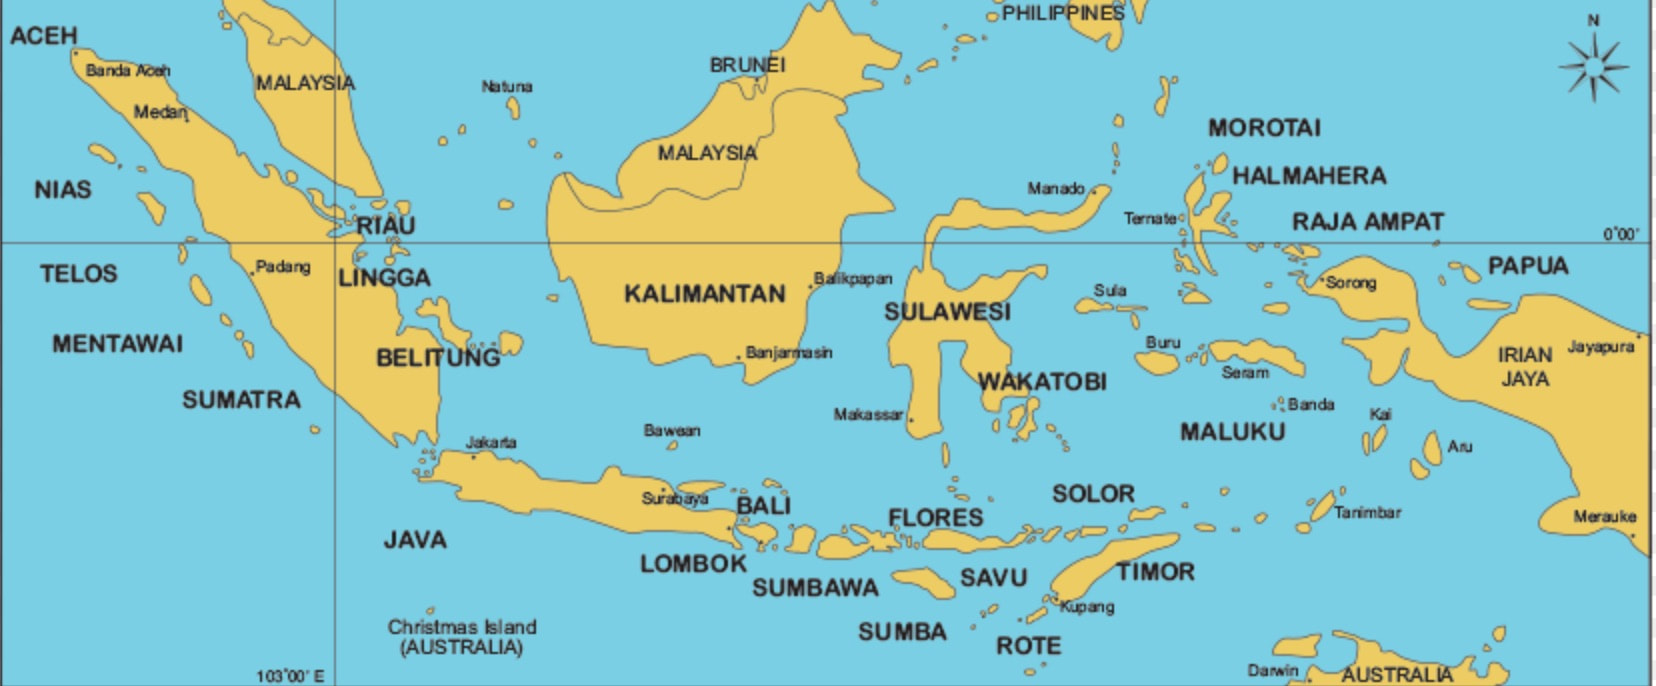 Indonesia as of 2018